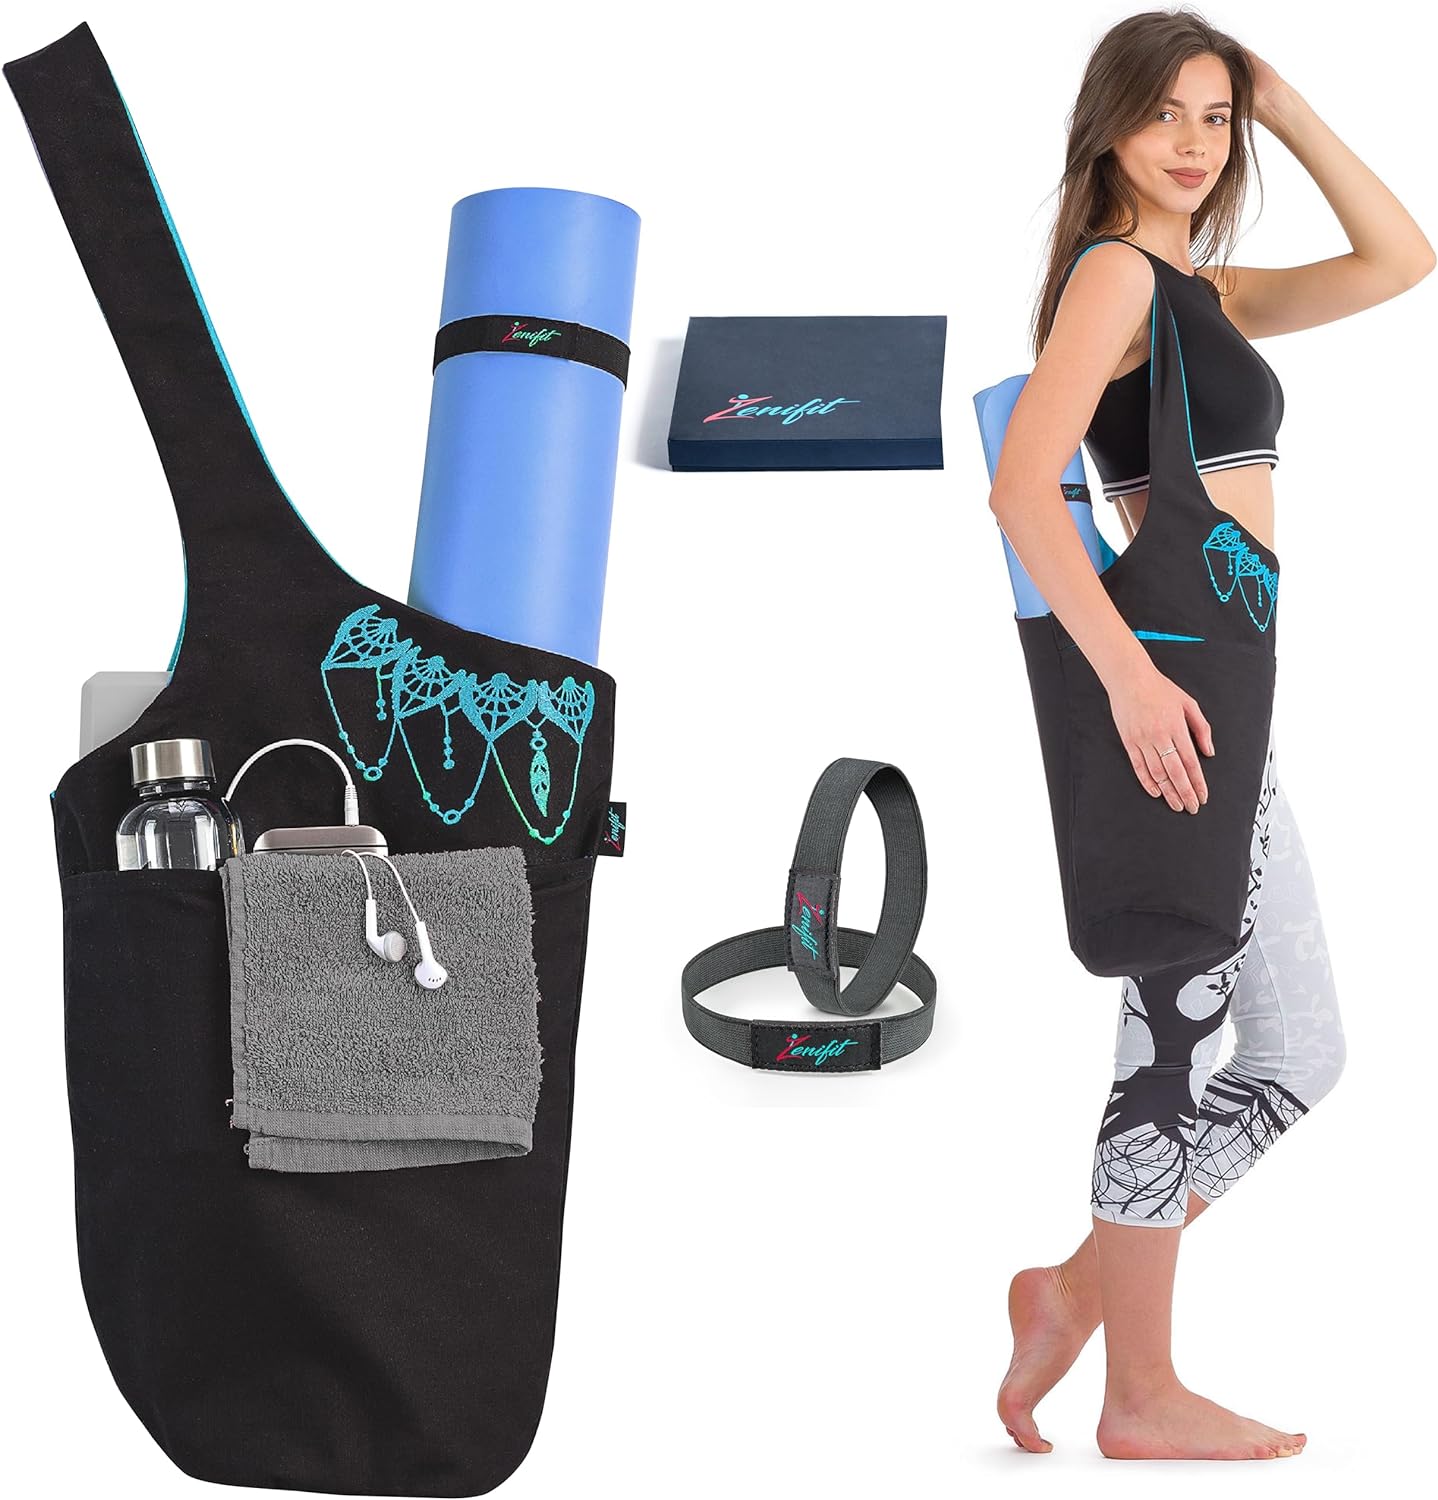 Yoga mat bag black and blue purple with accessories, gift box and elastics, women wearing yoga bag on shoulder